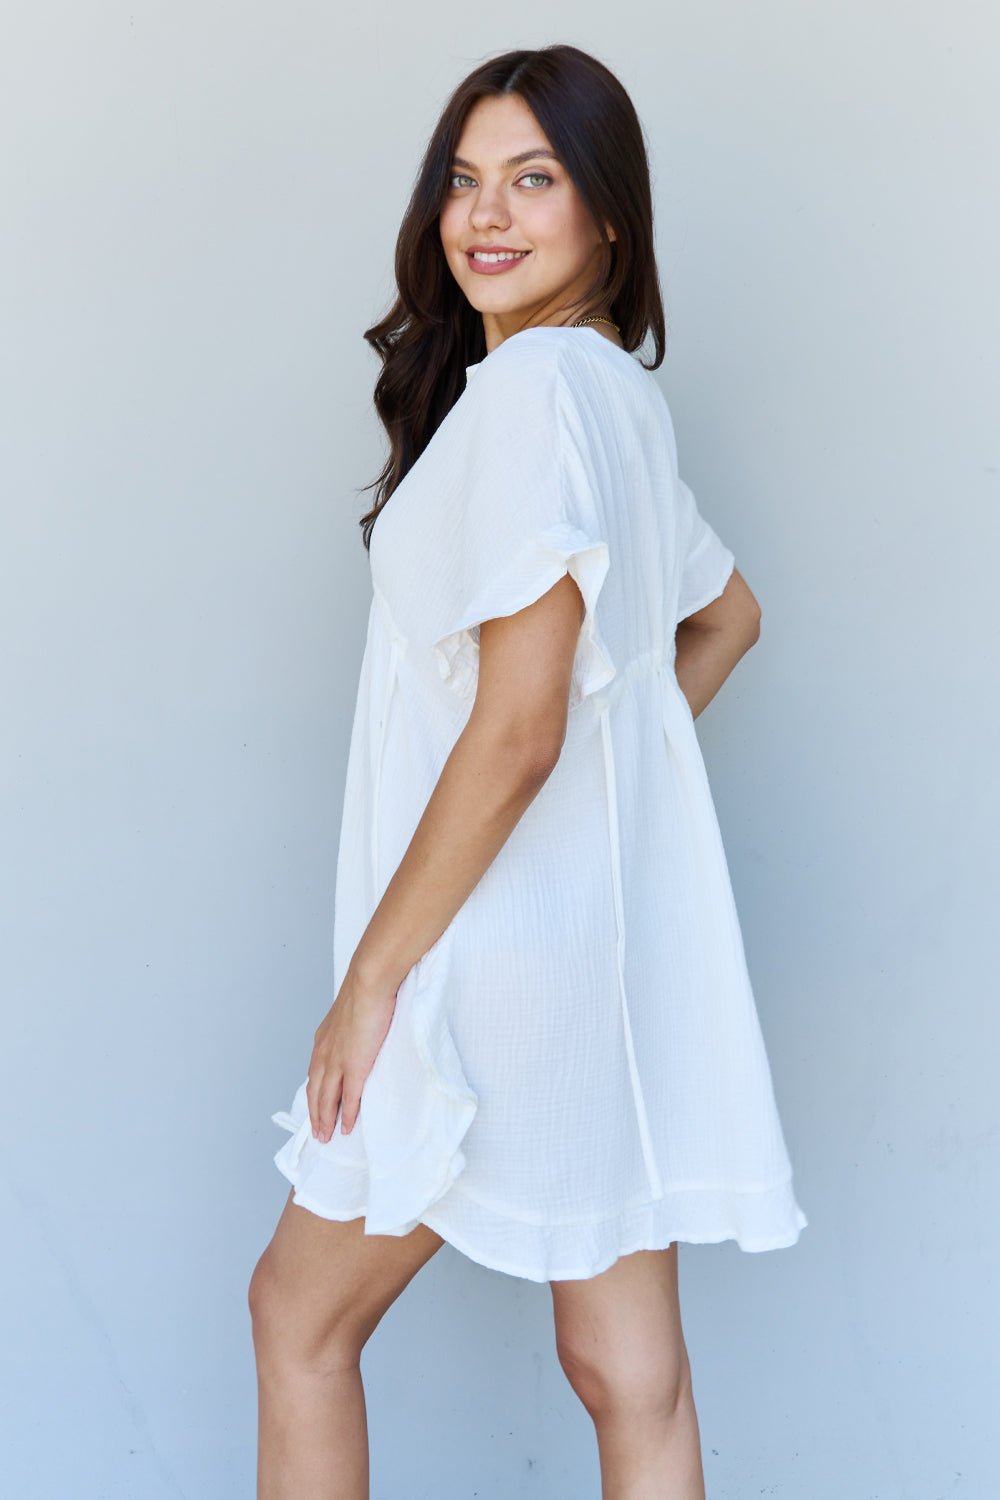 Ninexis Out Of Time Full Size Ruffle Hem Dress with Drawstring Waistband in White - Guy Christopher